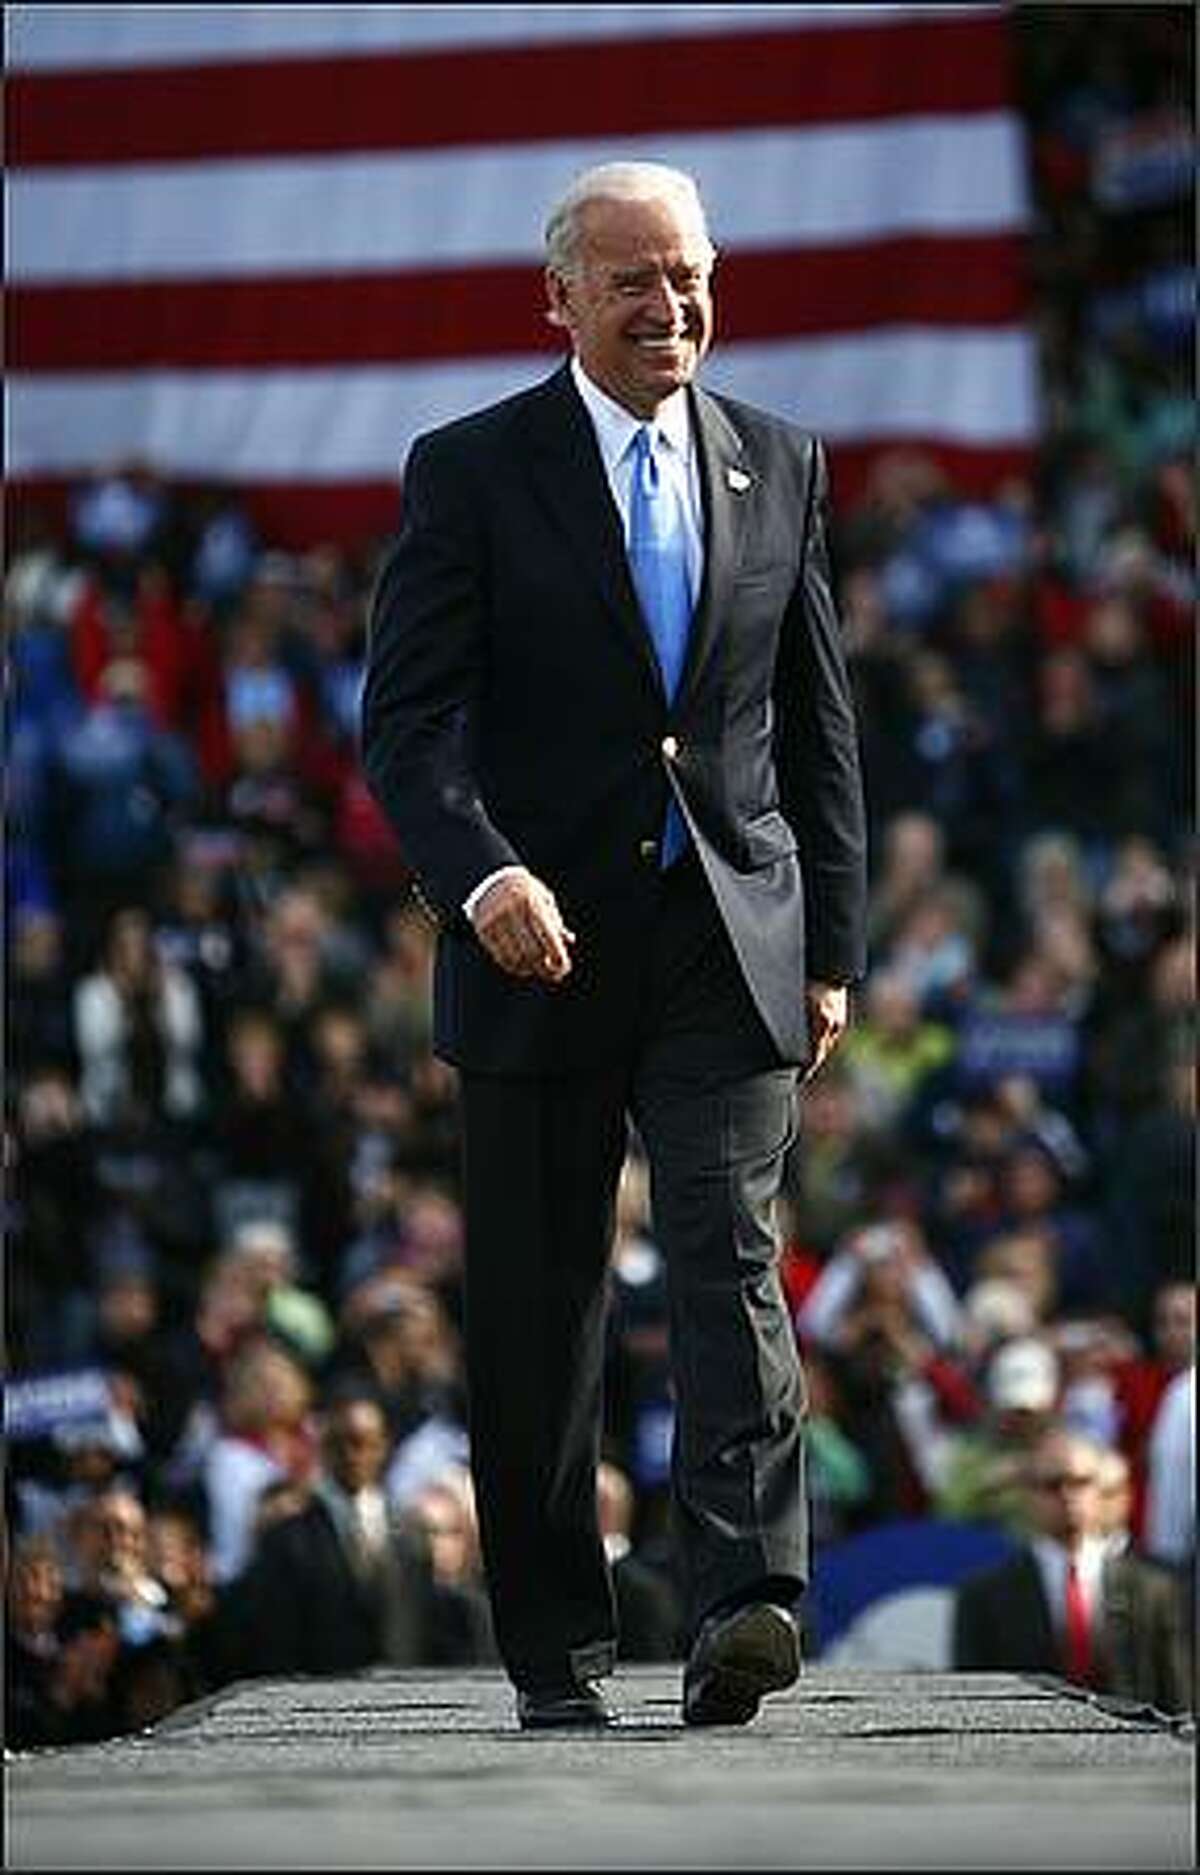 Democratic Vice Presidential candidate Joe Biden takes the stage at Cheney Stadium in Tacoma.